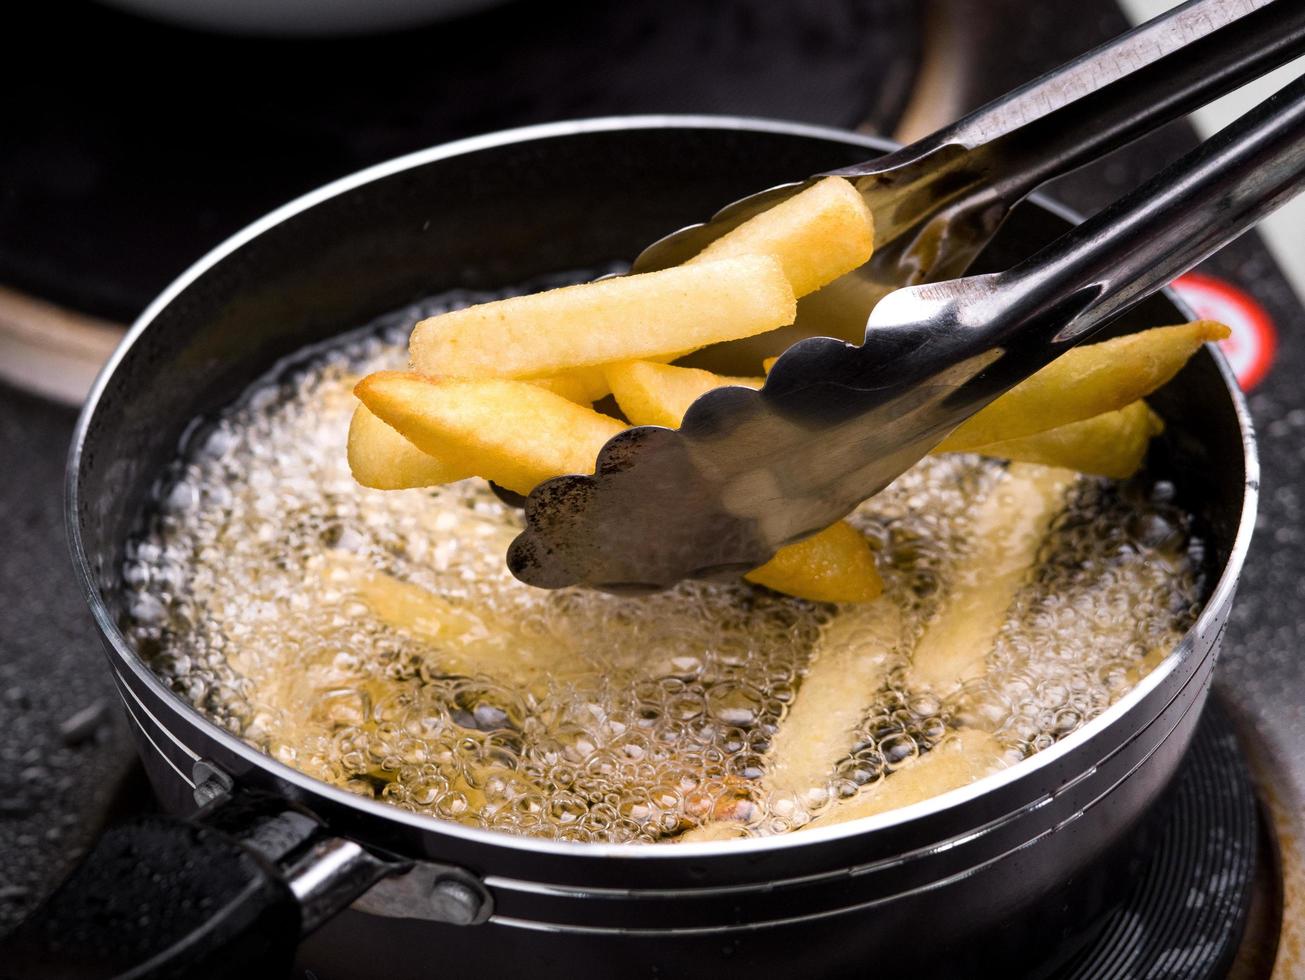 https://static.vecteezy.com/system/resources/previews/003/735/772/non_2x/close-up-of-frying-french-fries-in-the-fryer-in-hot-oil-on-the-electric-stove-in-the-kitchen-making-homemade-french-fries-free-photo.jpg